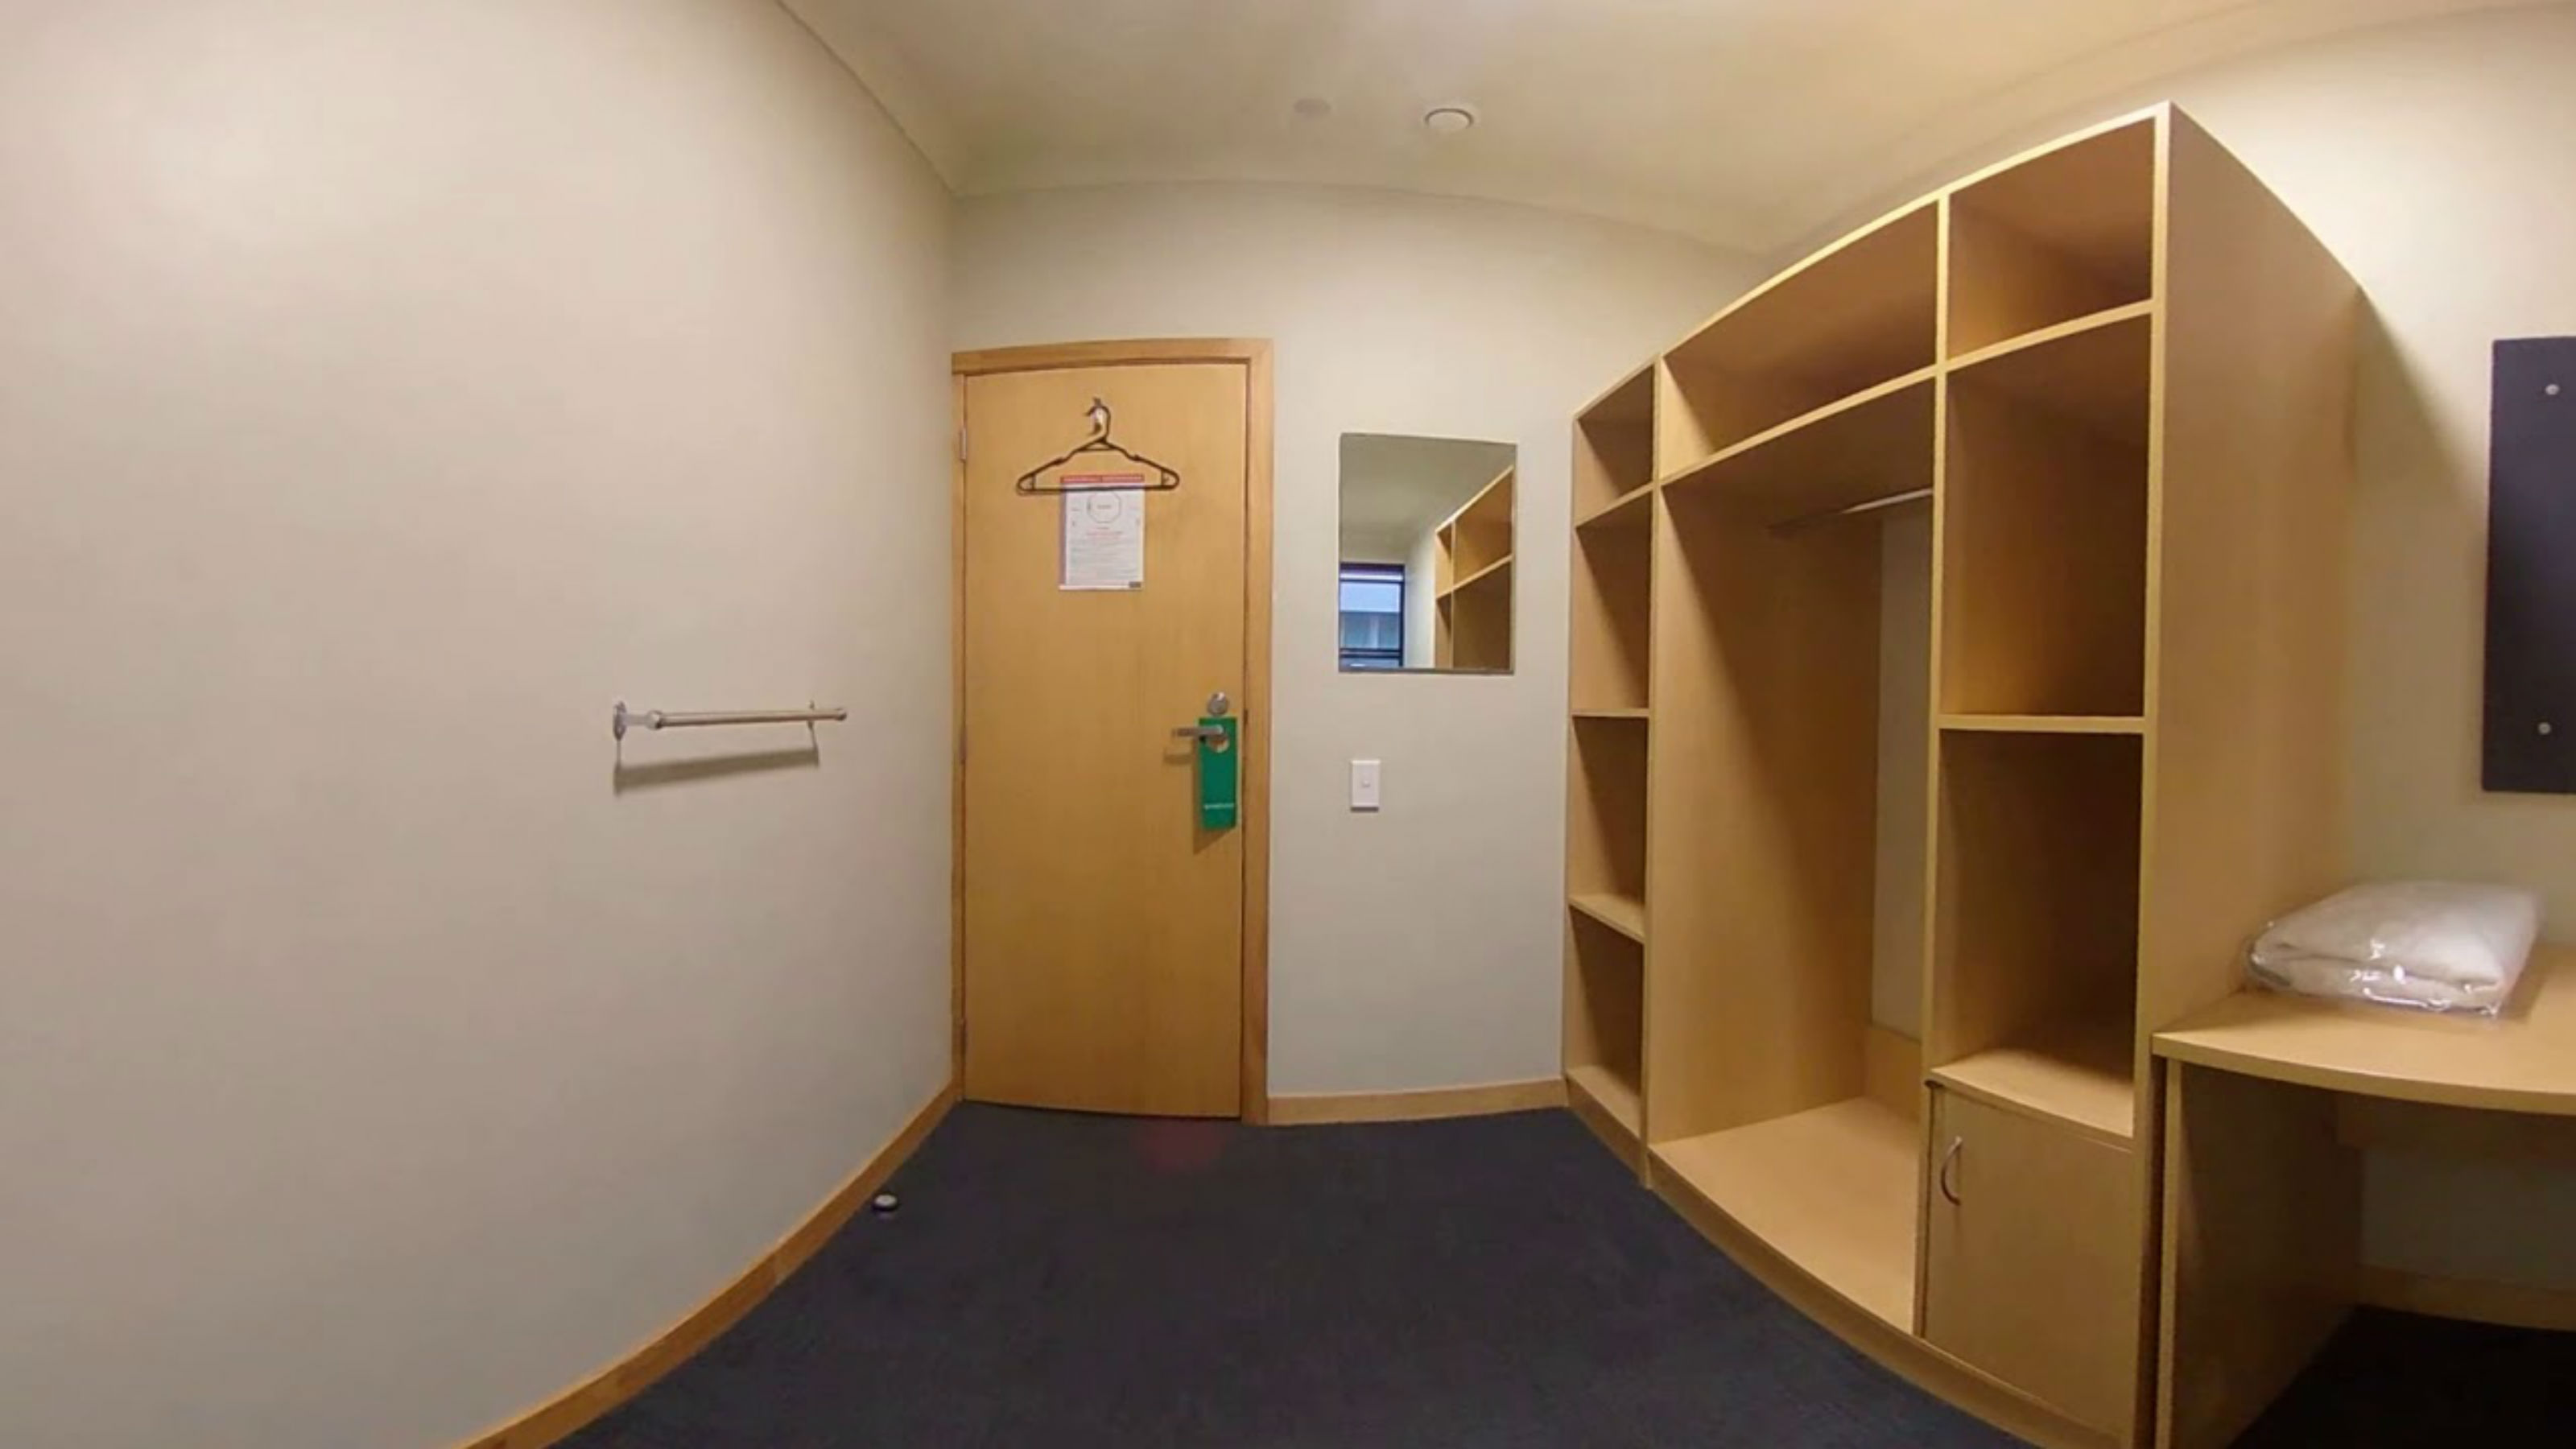 Image of an empty from the inside facing a closed door and empty wardrobe.